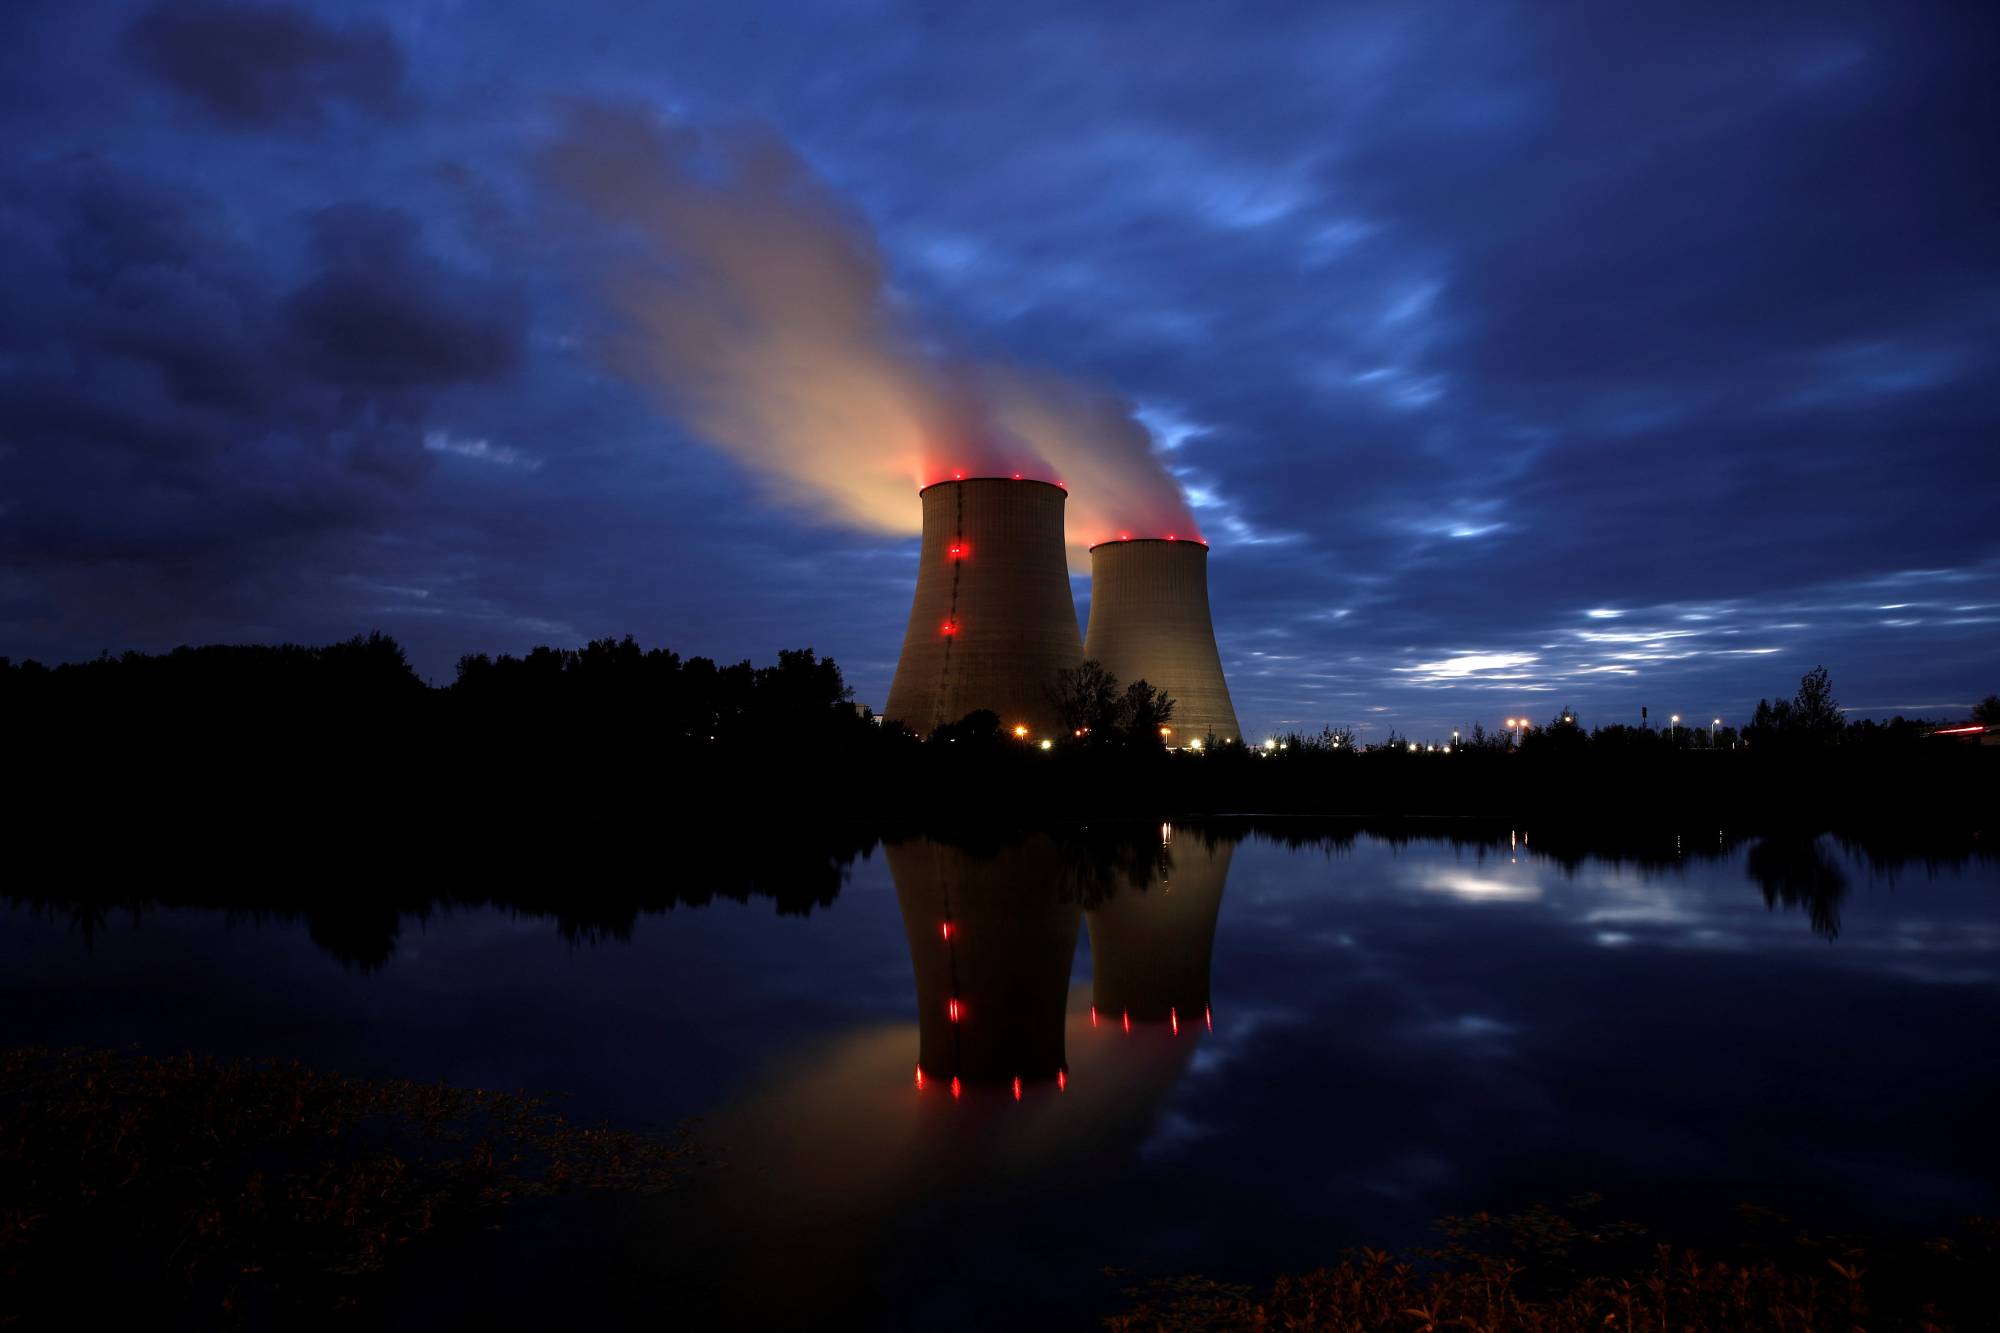 Steam rises from cooling towers of the Electricite de France (EDF) nuclear power plant in Belleville-sur-Loire, France, on Oct. 12. | REUTERS